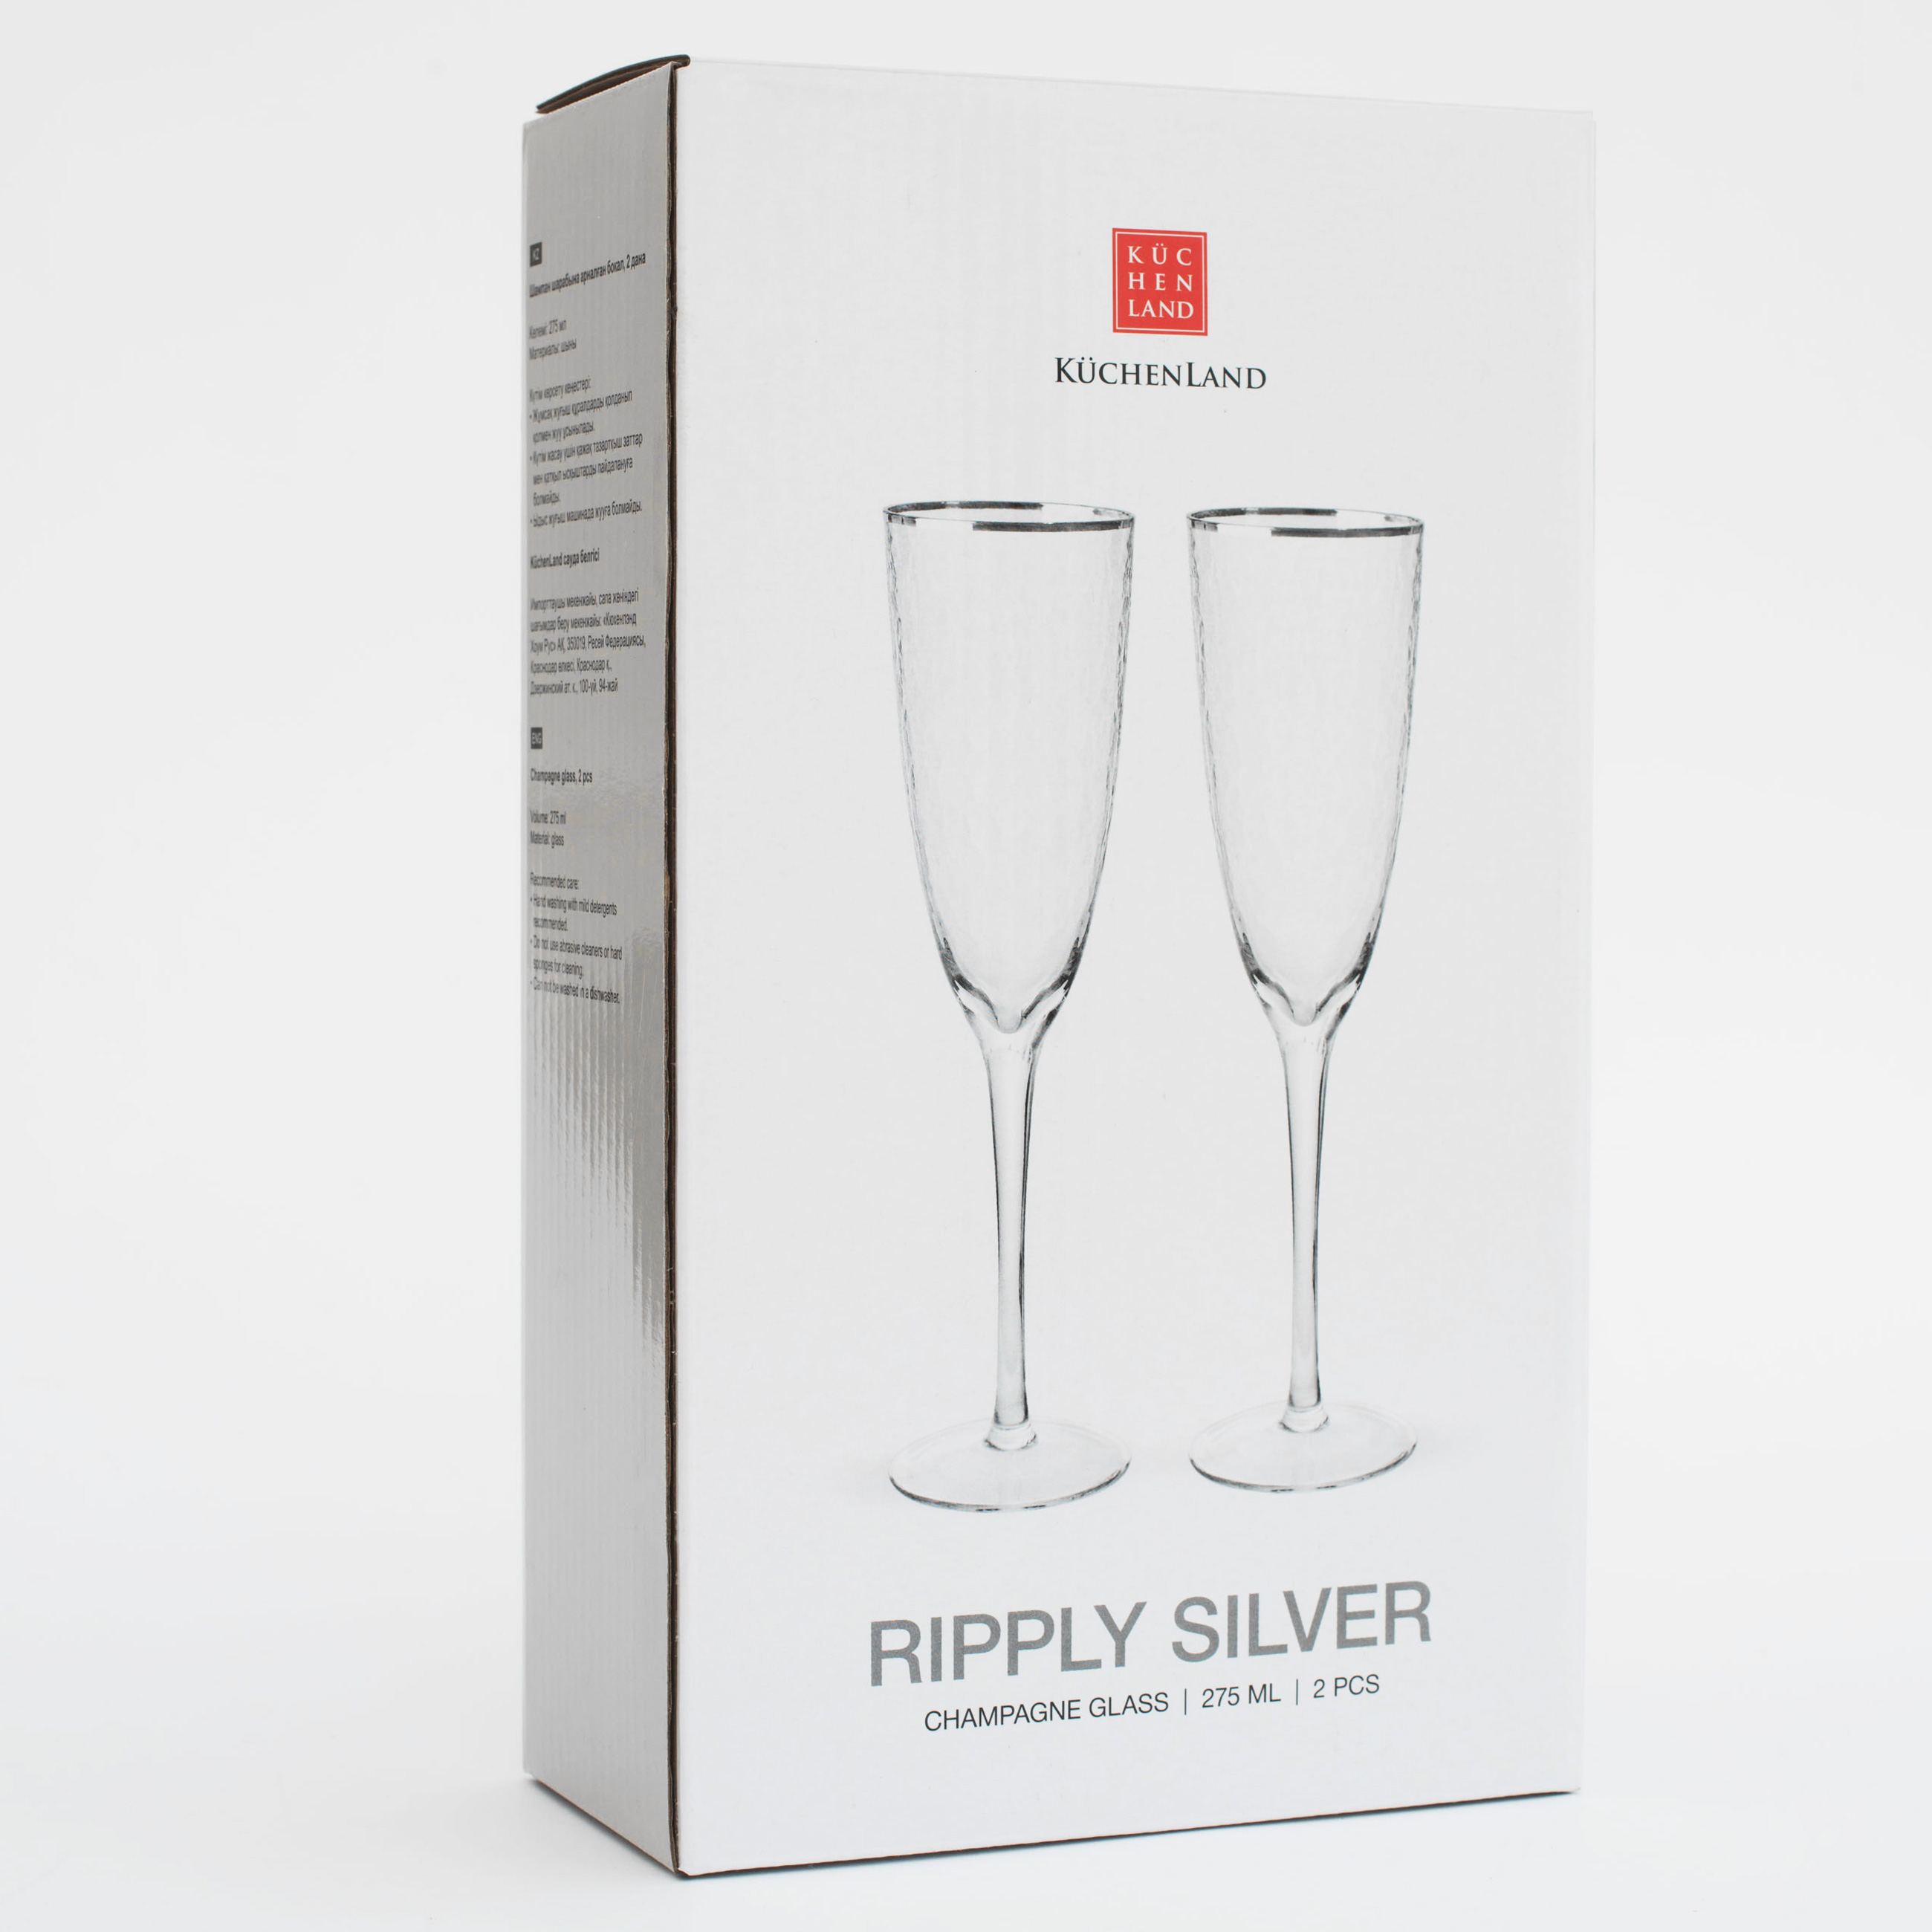 Champagne glass, 275 ml, 2 pcs, glass, with silver edging, Ripply silver изображение № 6